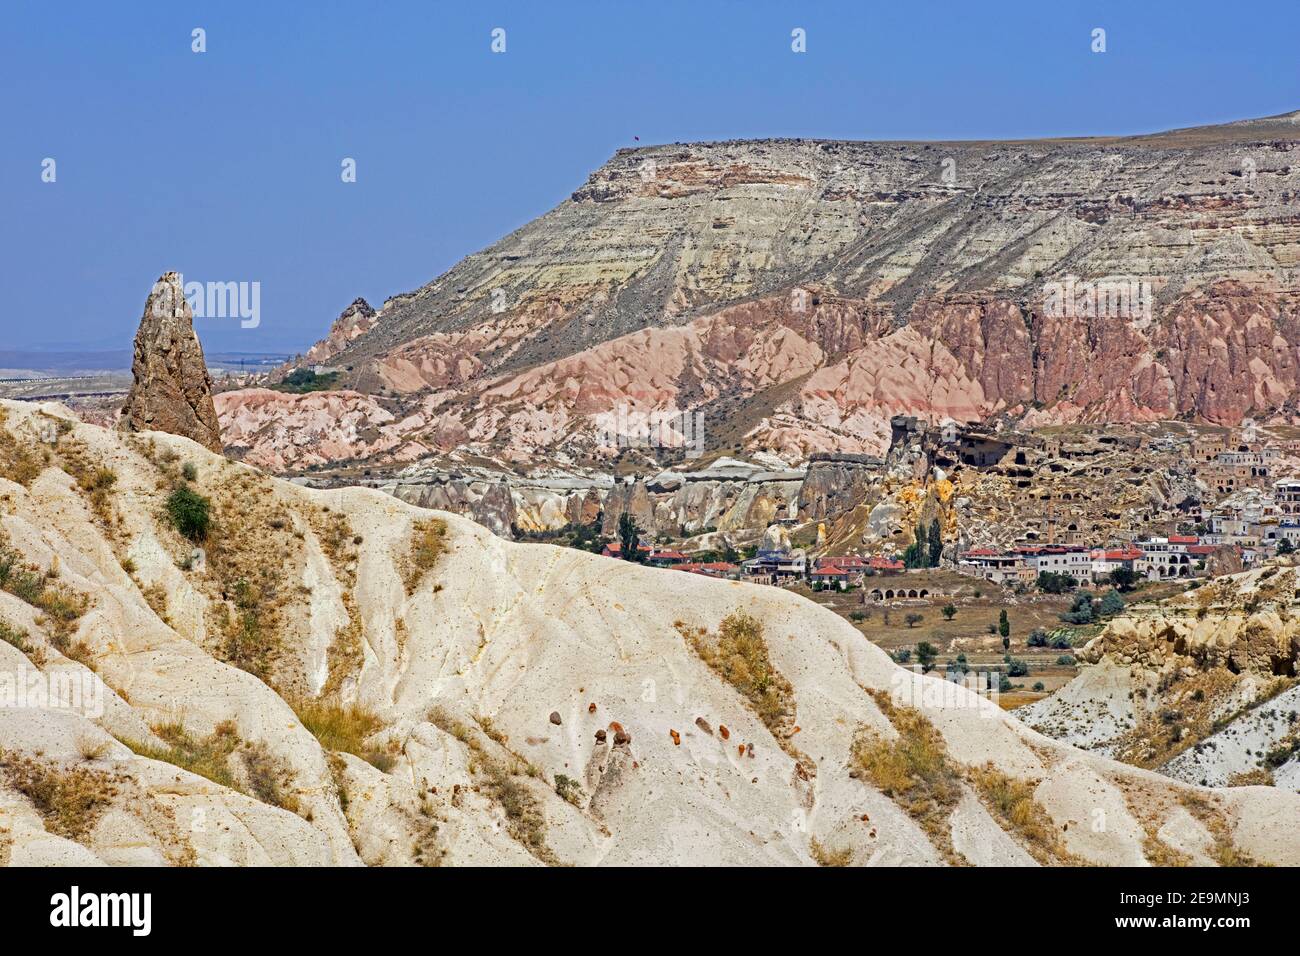 The town / village Göreme among the fairy chimney rock formations in Cappadocia, Nevşehir Province in Central Anatolia, Turkey Stock Photo